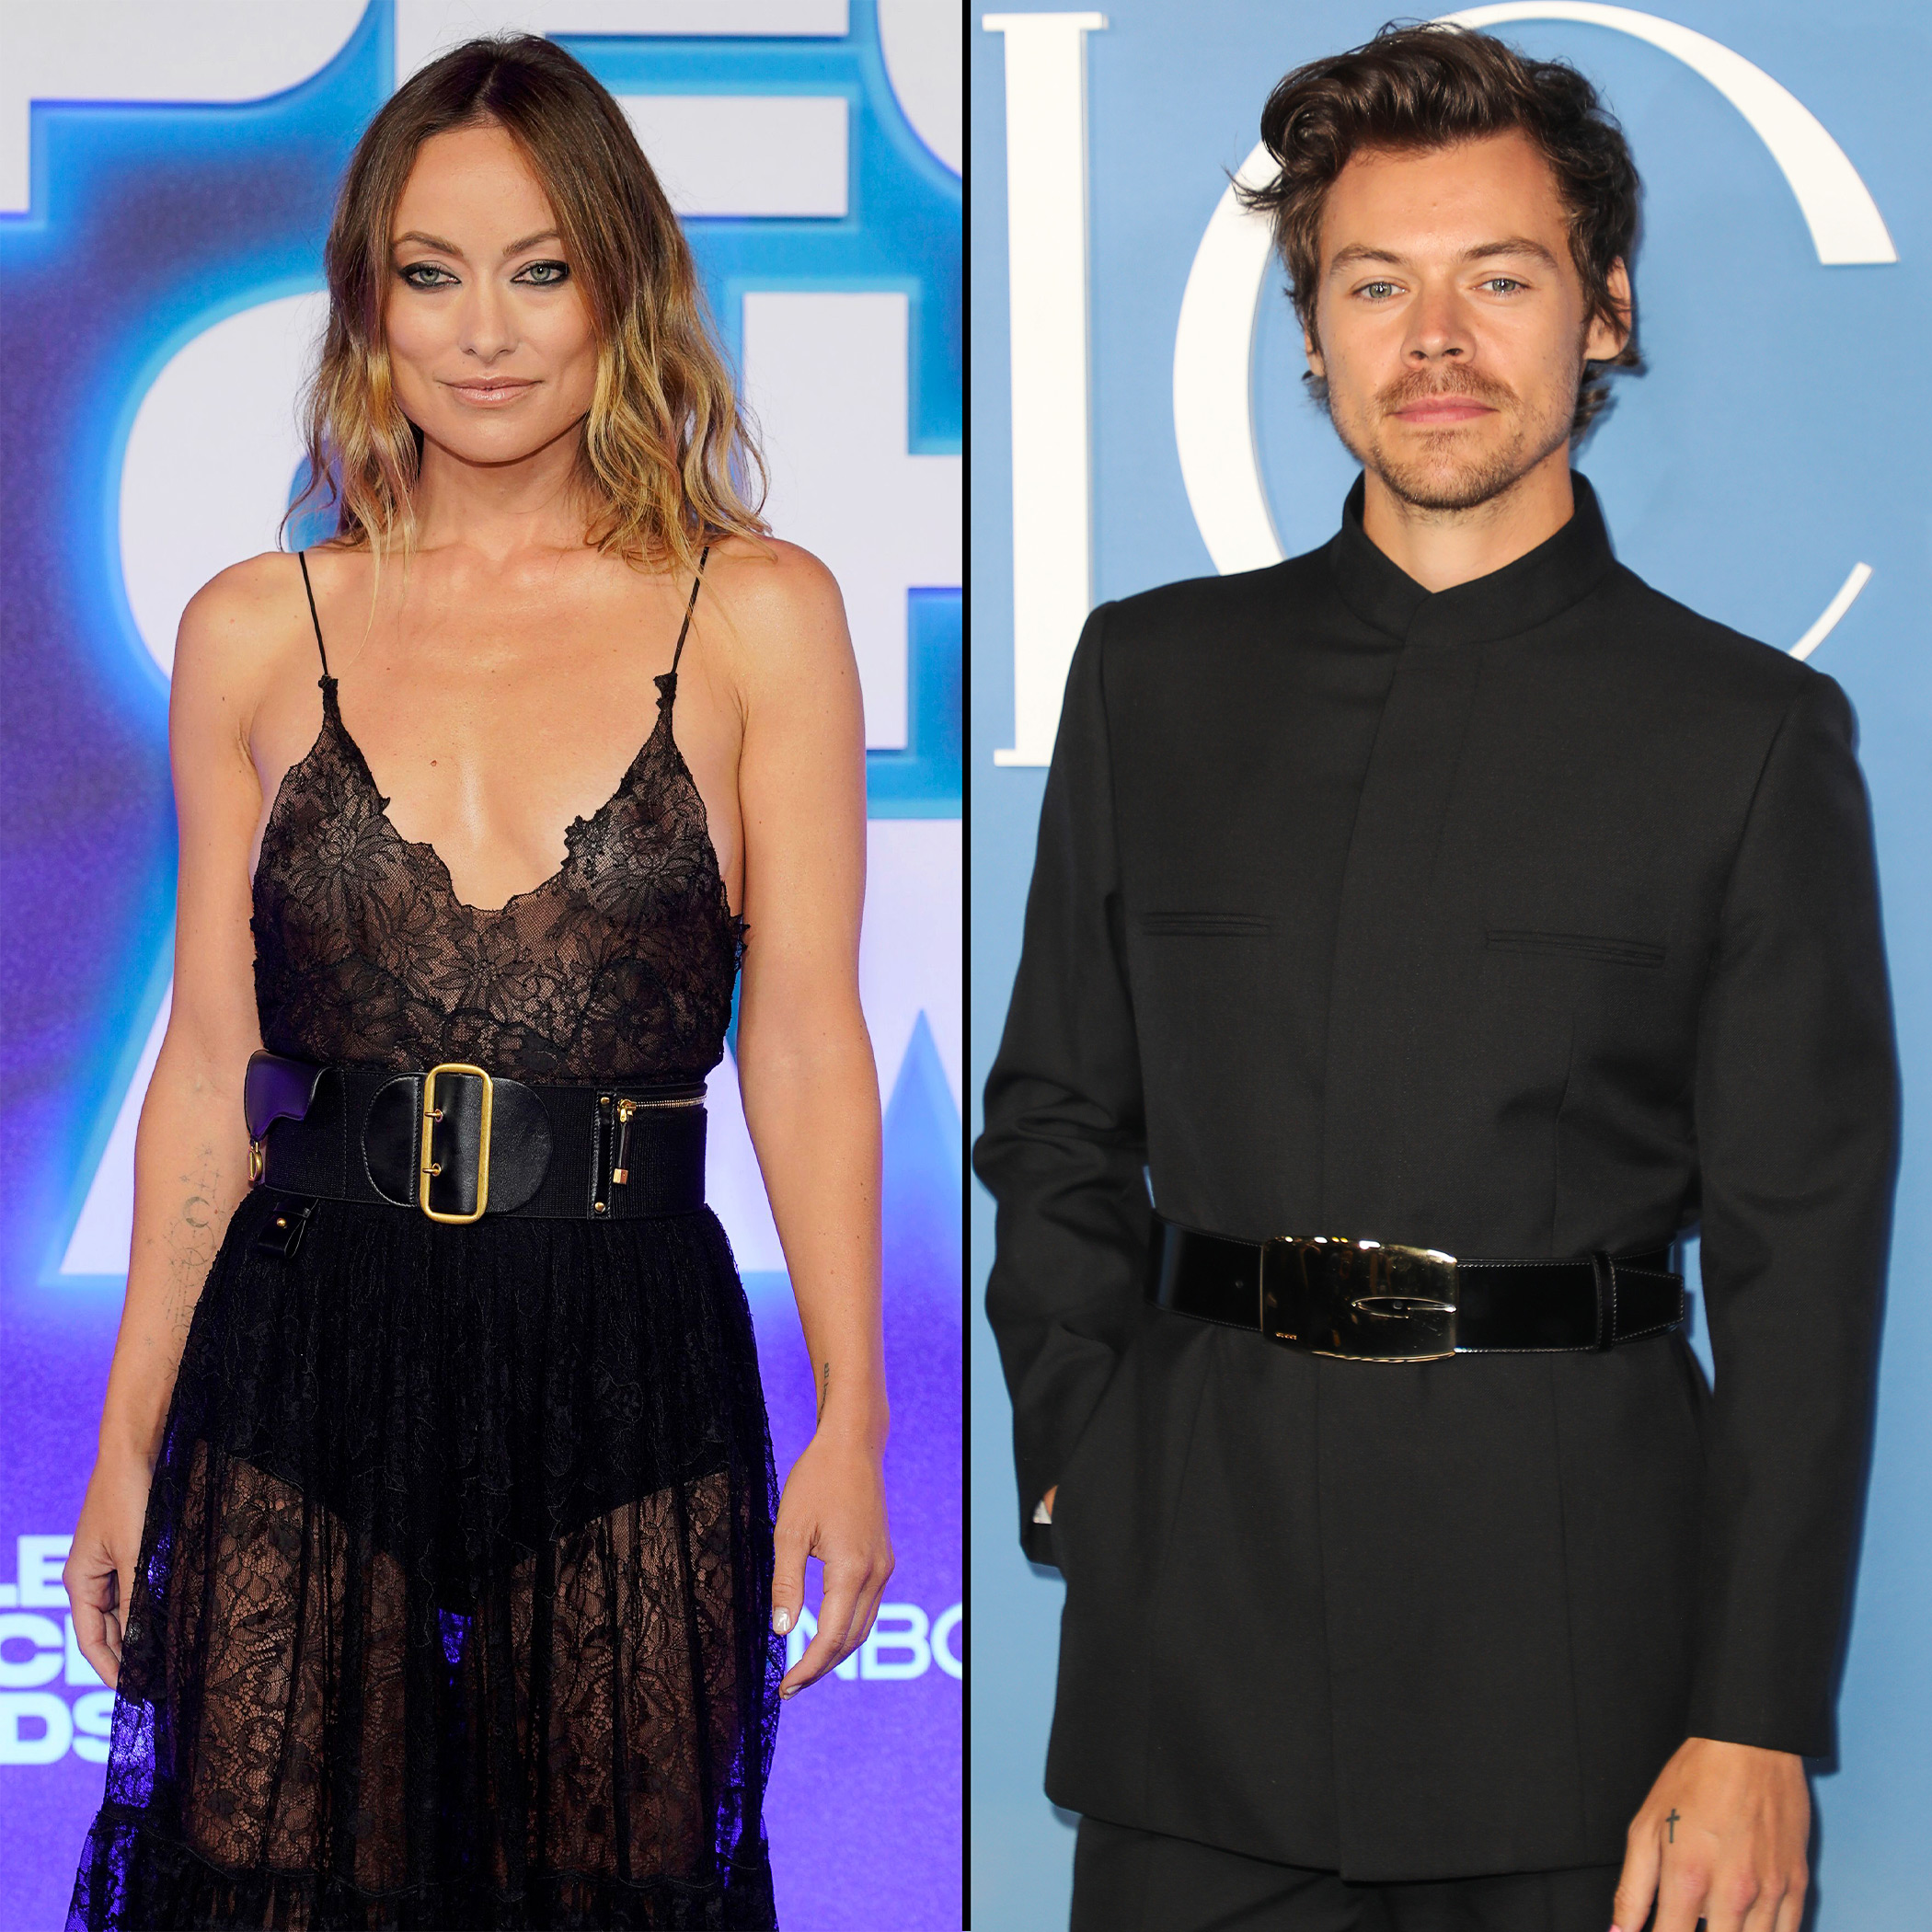 https://www.usmagazine.com/wp-content/uploads/2022/12/Olivia-Wilde-Is-Still-%E2%80%98Very-Much-Upset-Over-Harry-Styles-Split-Dating-%E2%80%98Isnt-on-Her-List-of-Priorities-802.jpg?quality=86&strip=all